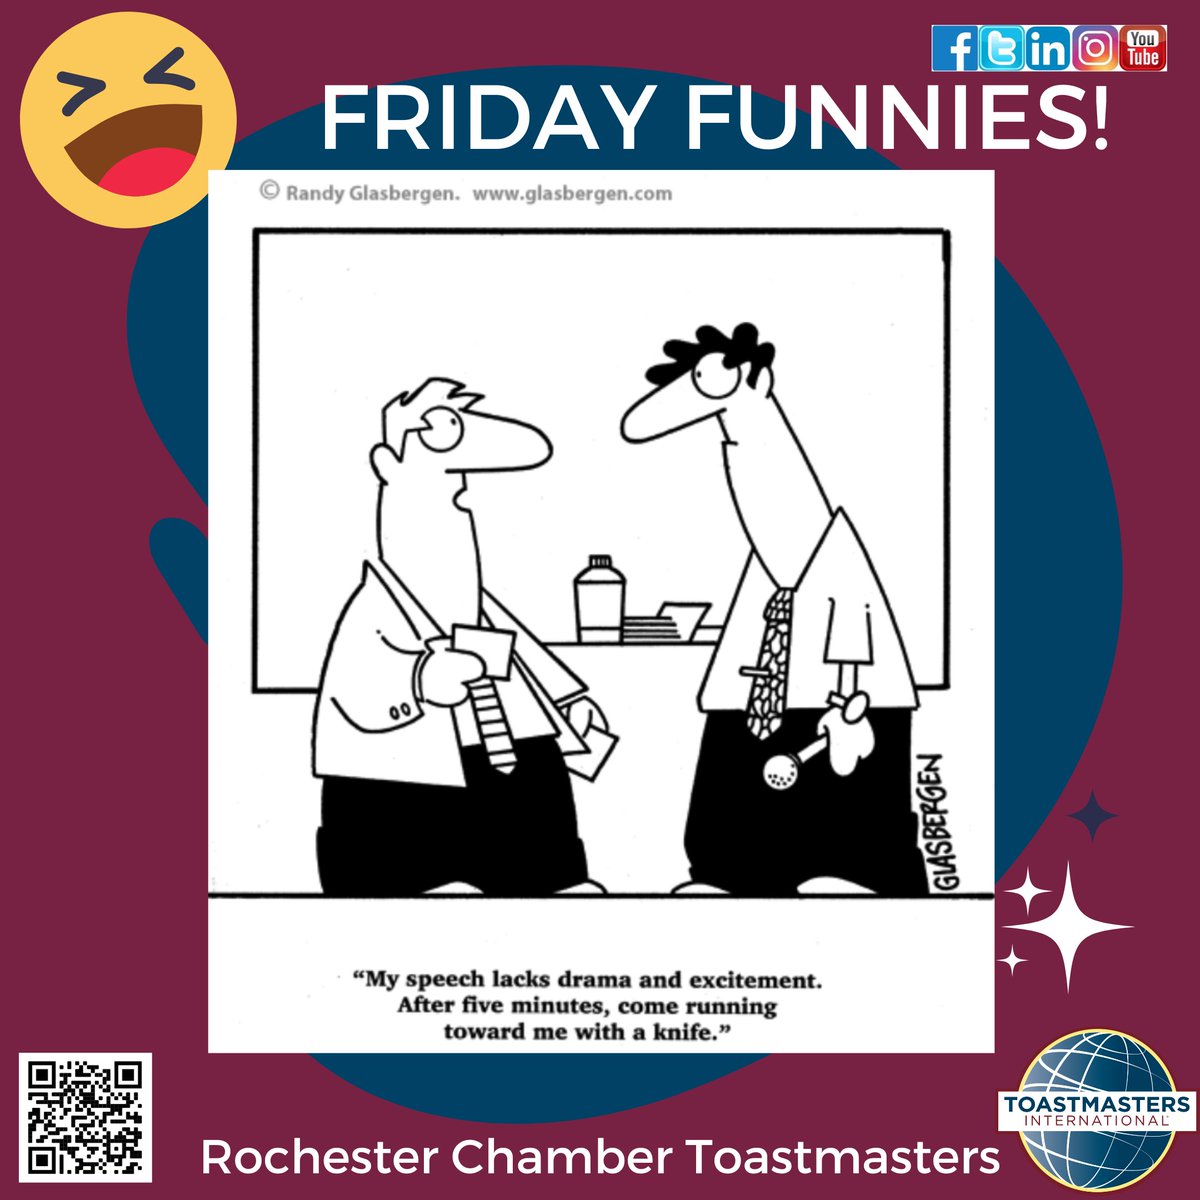 #Friday Funnies 😆 It’s good to build surprises into presentations, but there can be limits #Toastmasters #publicspeaking #leadership #rochmn rochester_mn #mn #funny #humor #neighborshare #neighborstory #drama